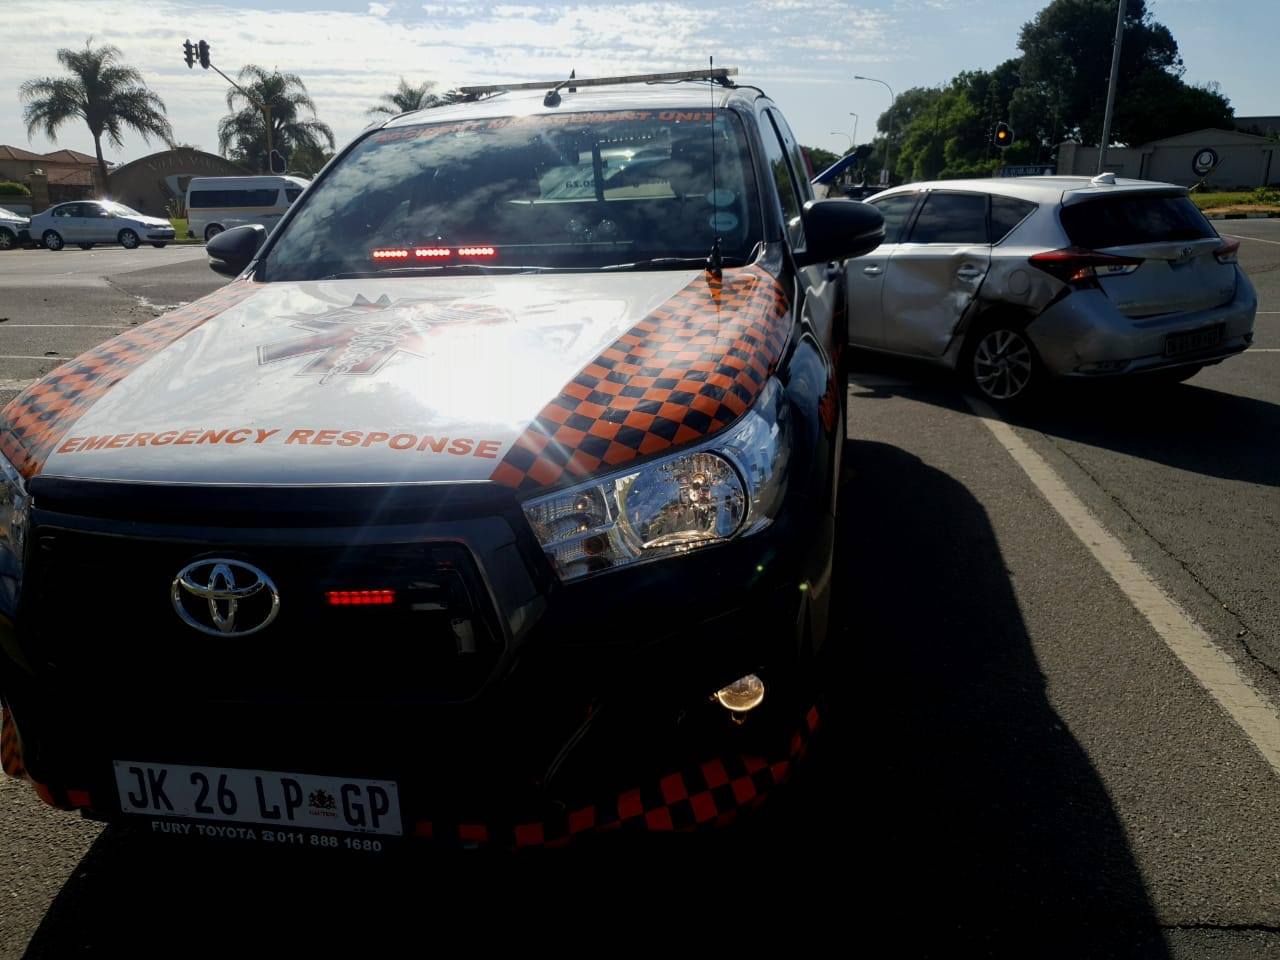 Collision at intersection in Radiokop